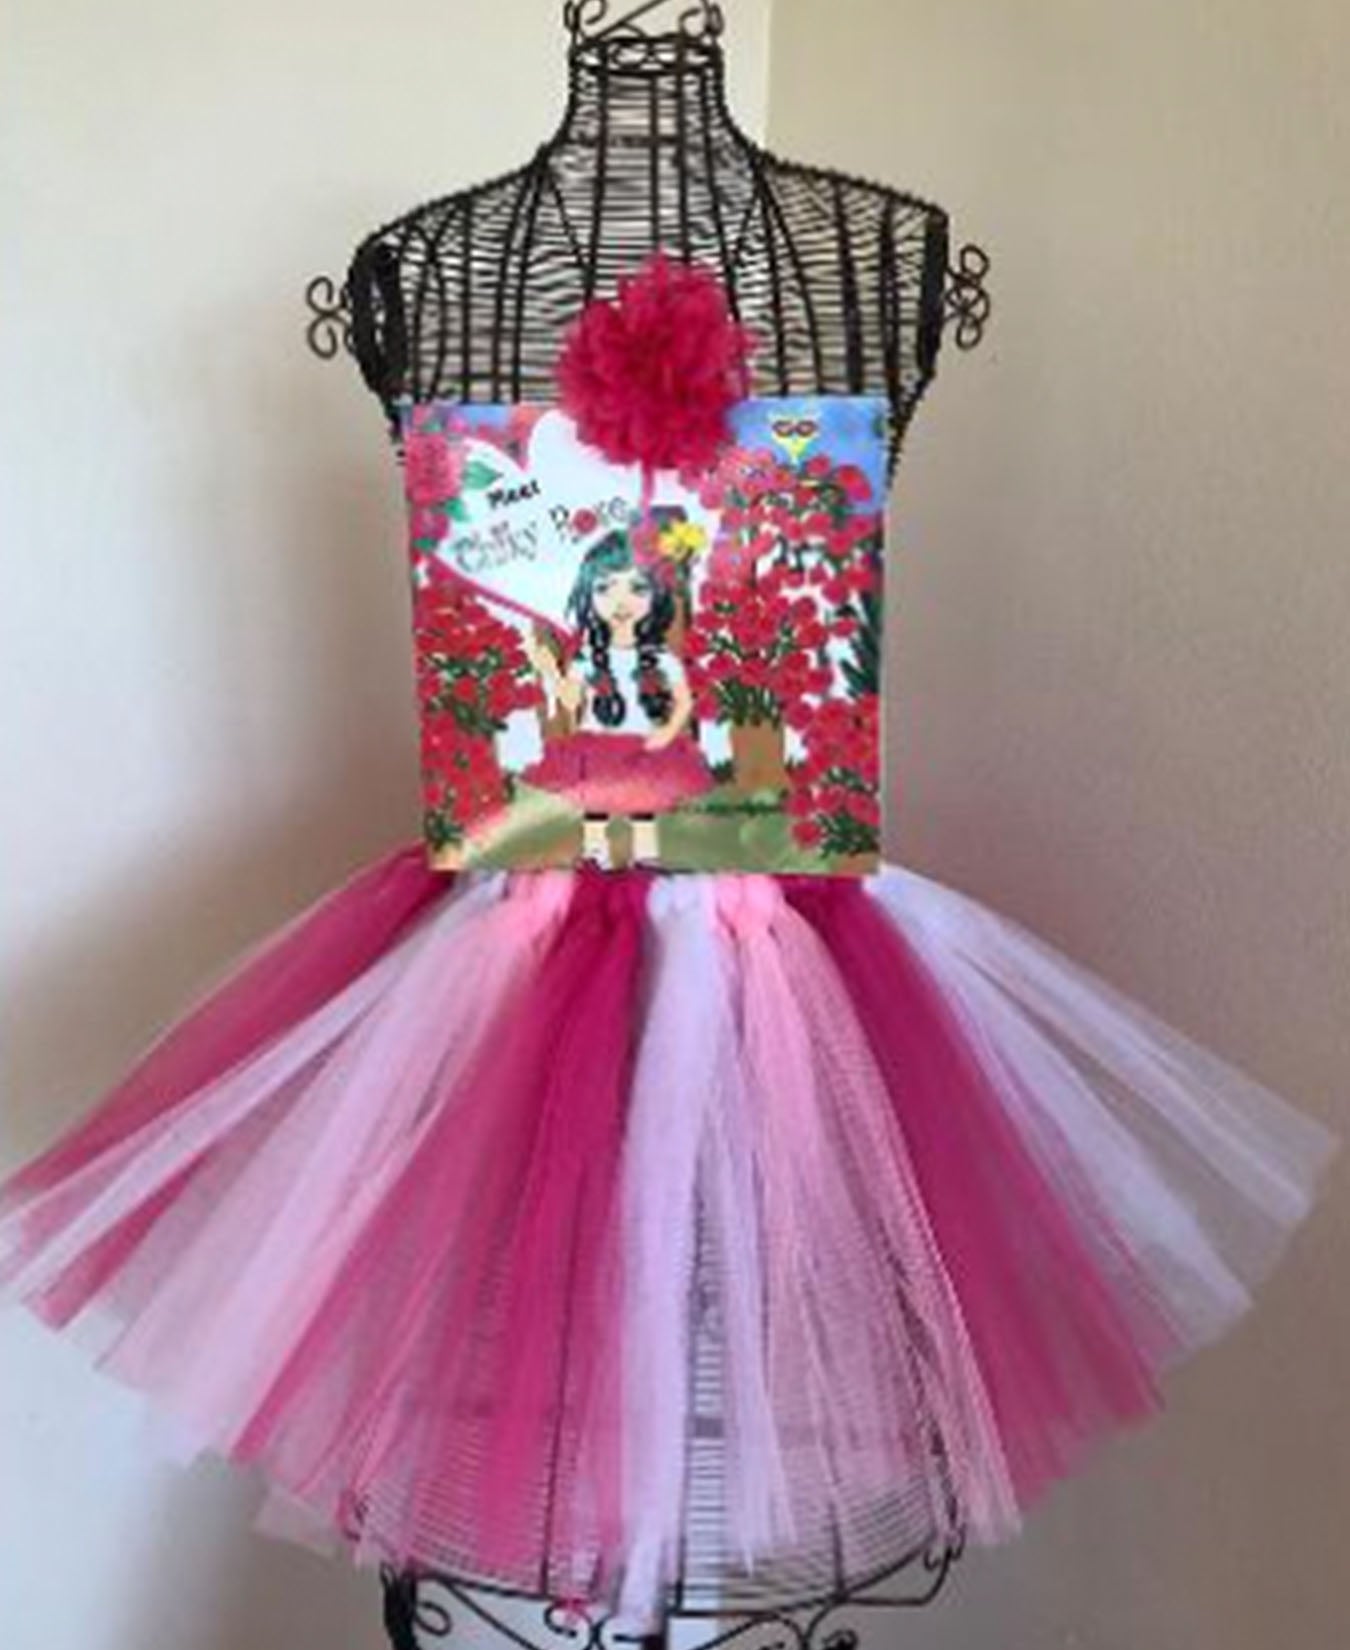 Z Chiky Rose multi color tutus, books, hair flowers and stickers